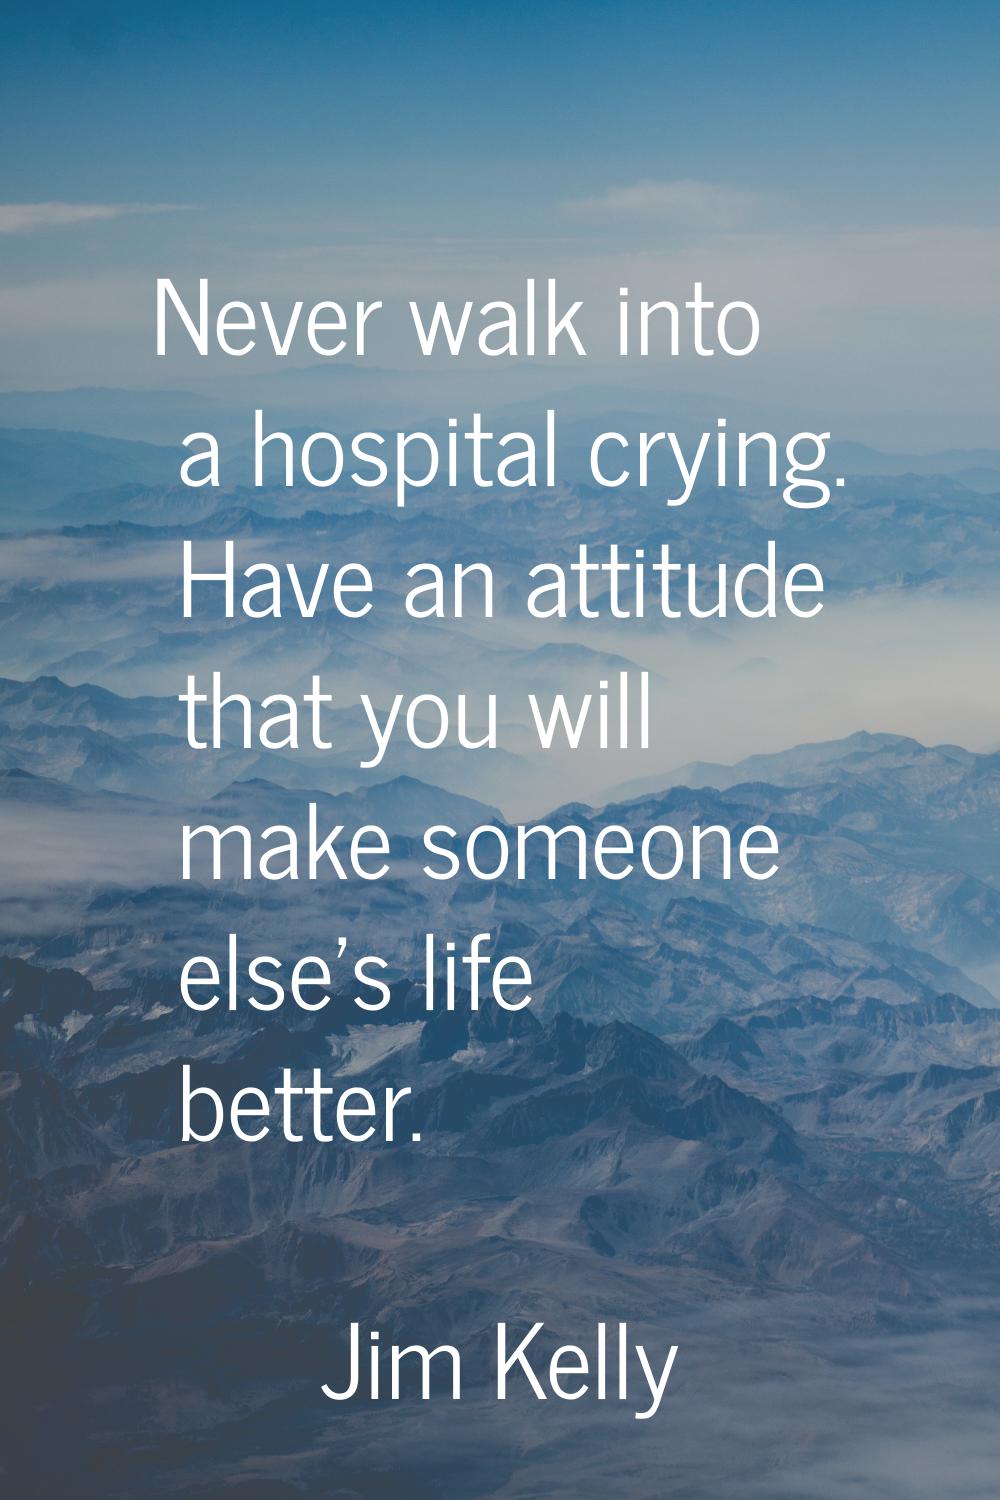 Never walk into a hospital crying. Have an attitude that you will make someone else's life better.